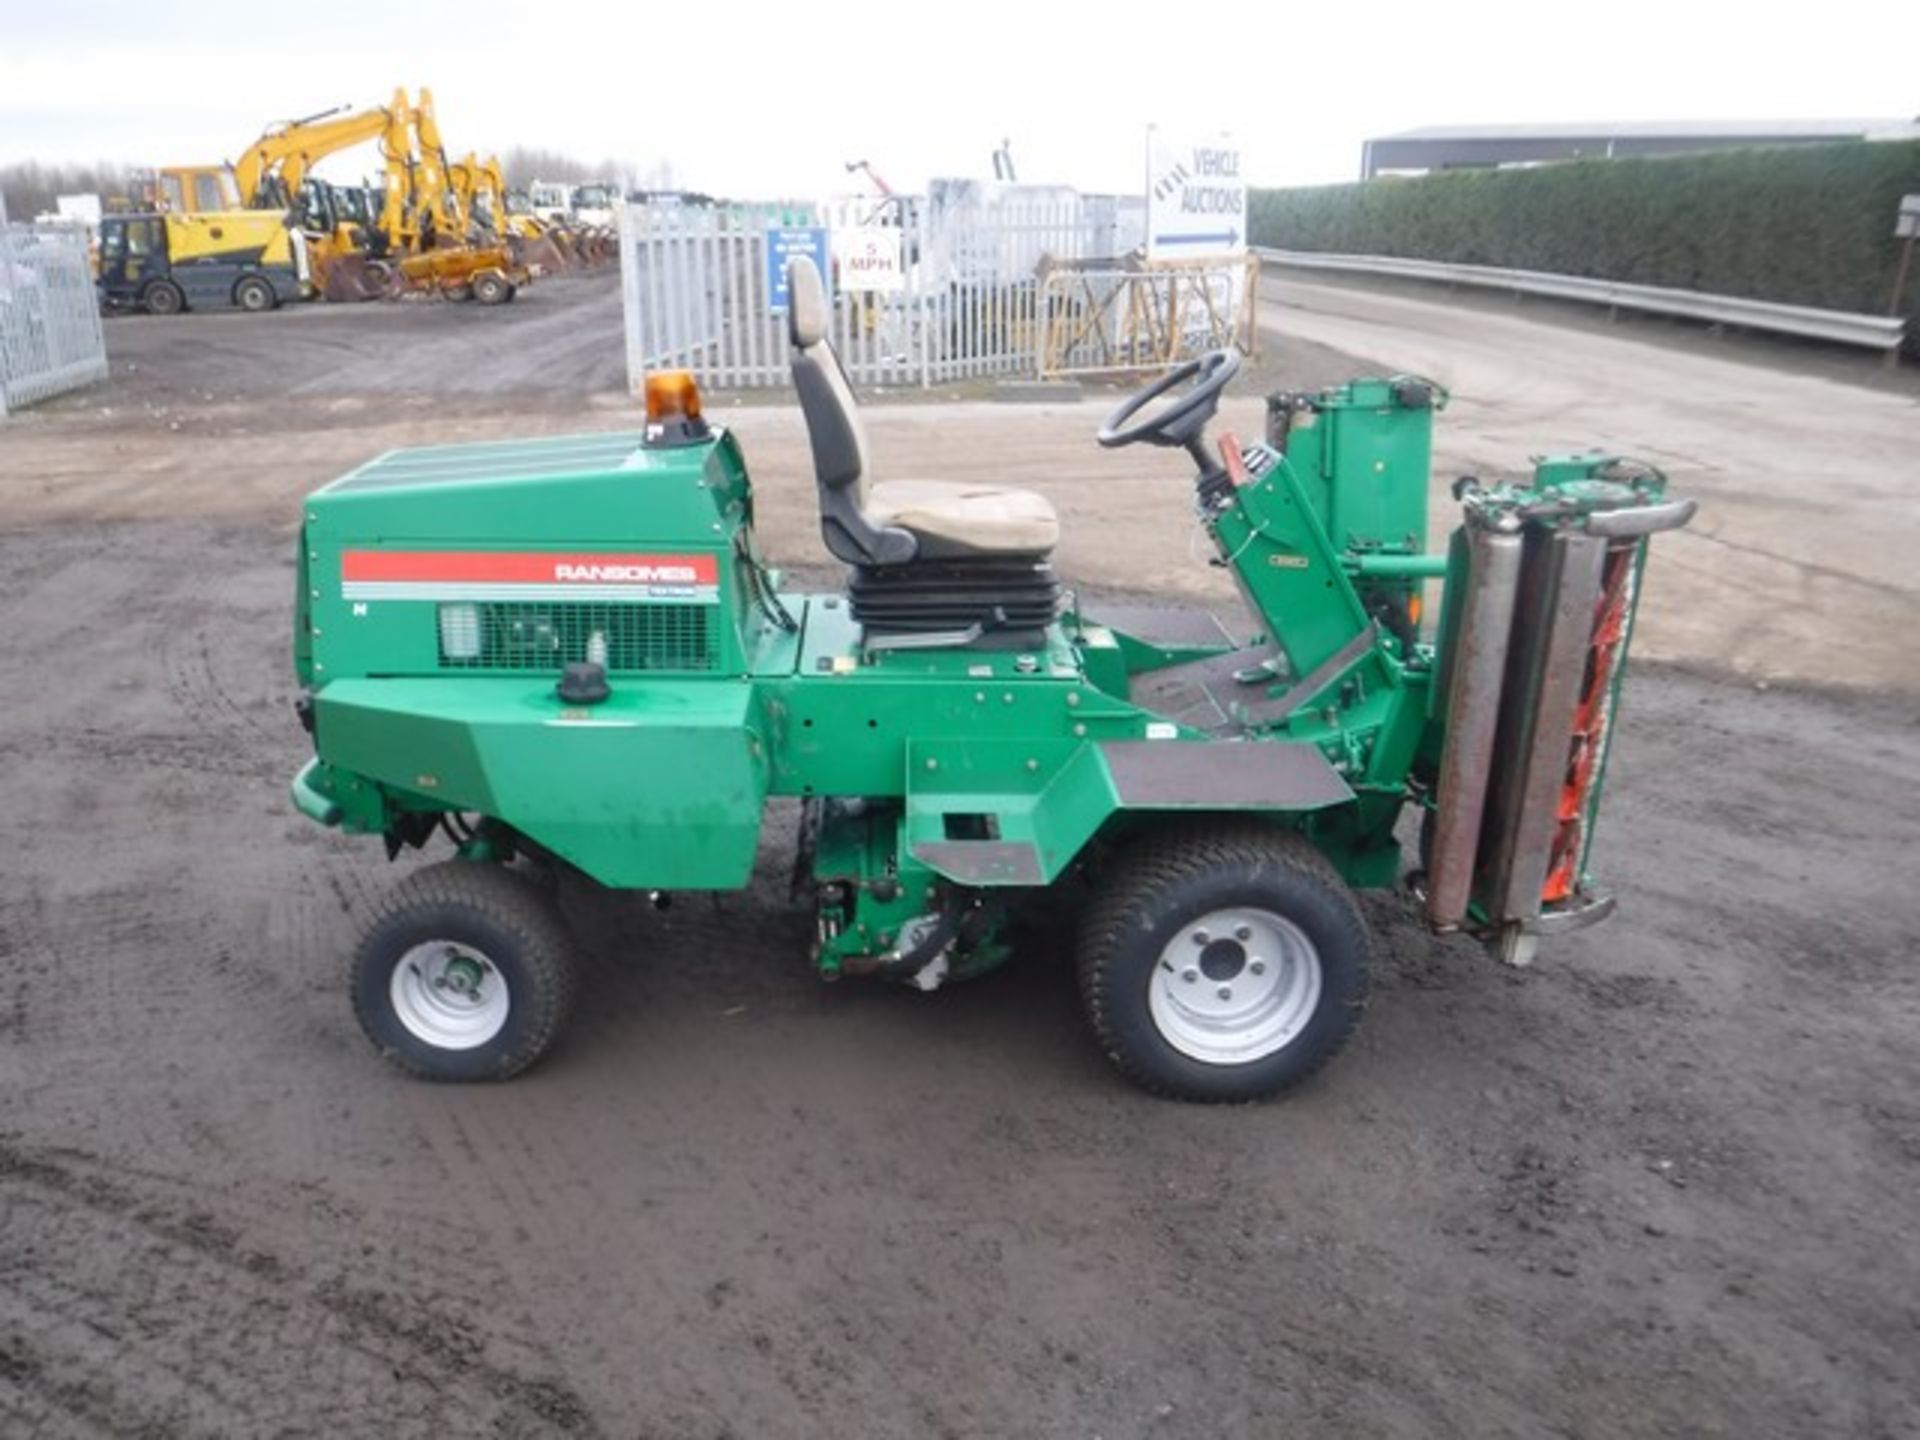 RANSOMES highway mower. 3351hrs.S/N WJ000723. Reg No. SN03 OSX - Image 2 of 7